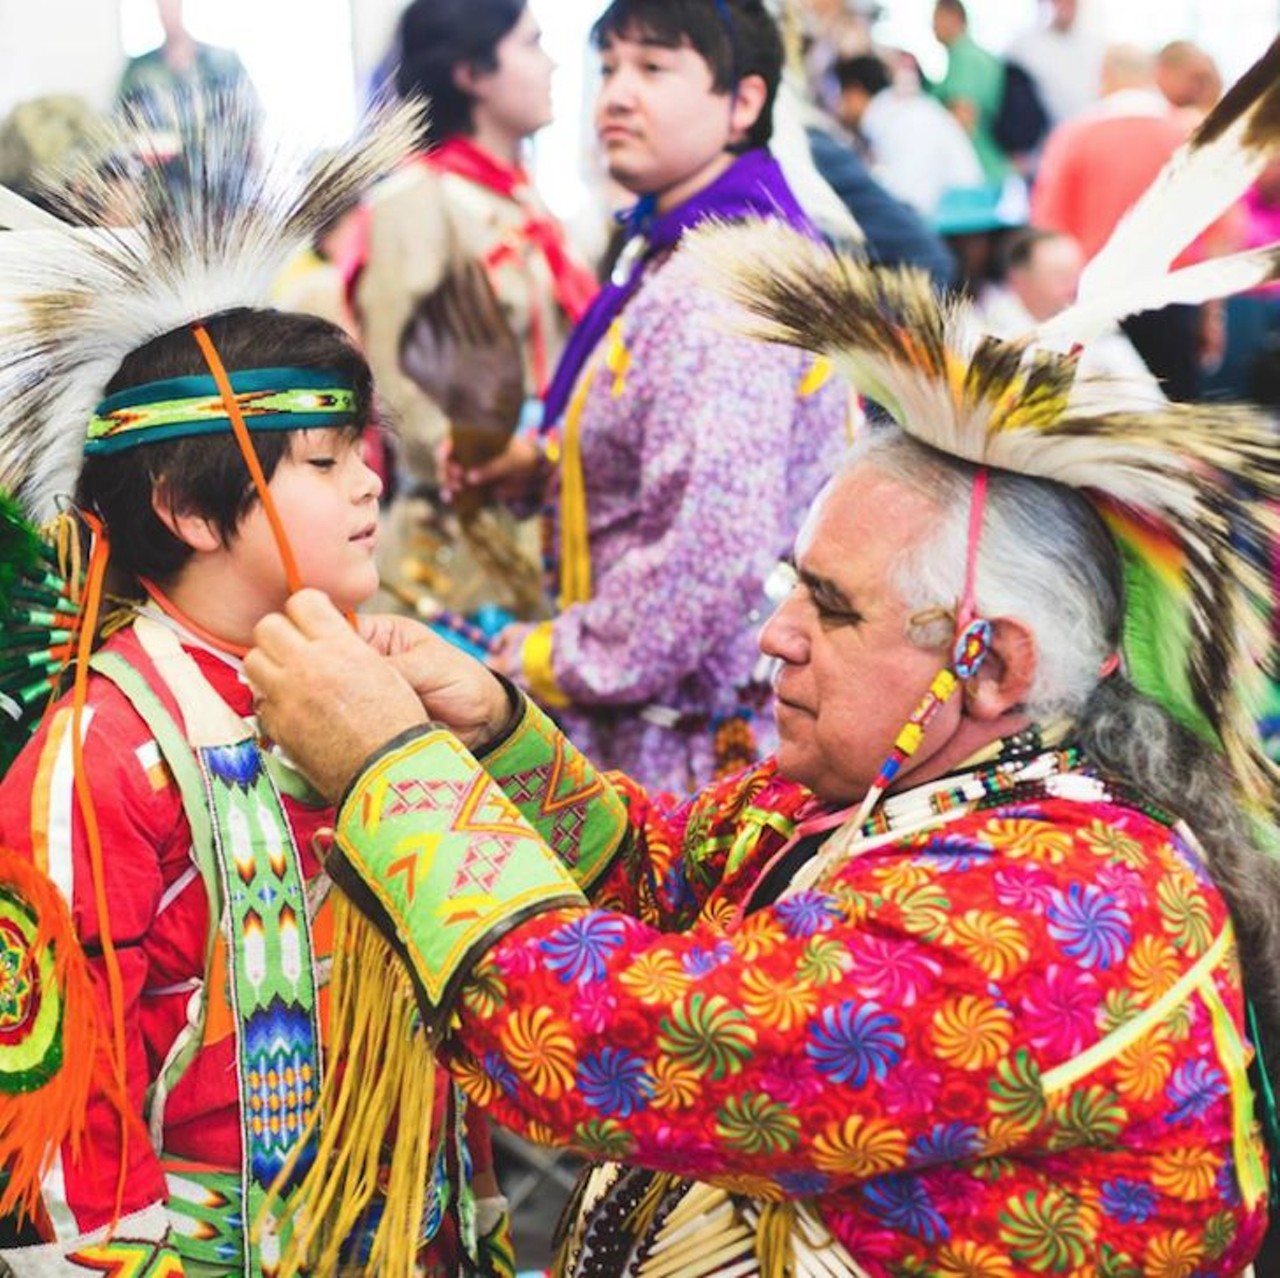 Celebration of Traditions Pow Wow
10 a.m. to 4 p.m. April 22 at Woodlawn Gymnasium 
Emerge yourself into the American Indian culture at this official Native American Pow Wow. The event promotes the culture&#146;s traditions through dance and music as well as the chance for Native individuals to celebrate their heritage.
Photo via Facebook, Fiesta San Antonio